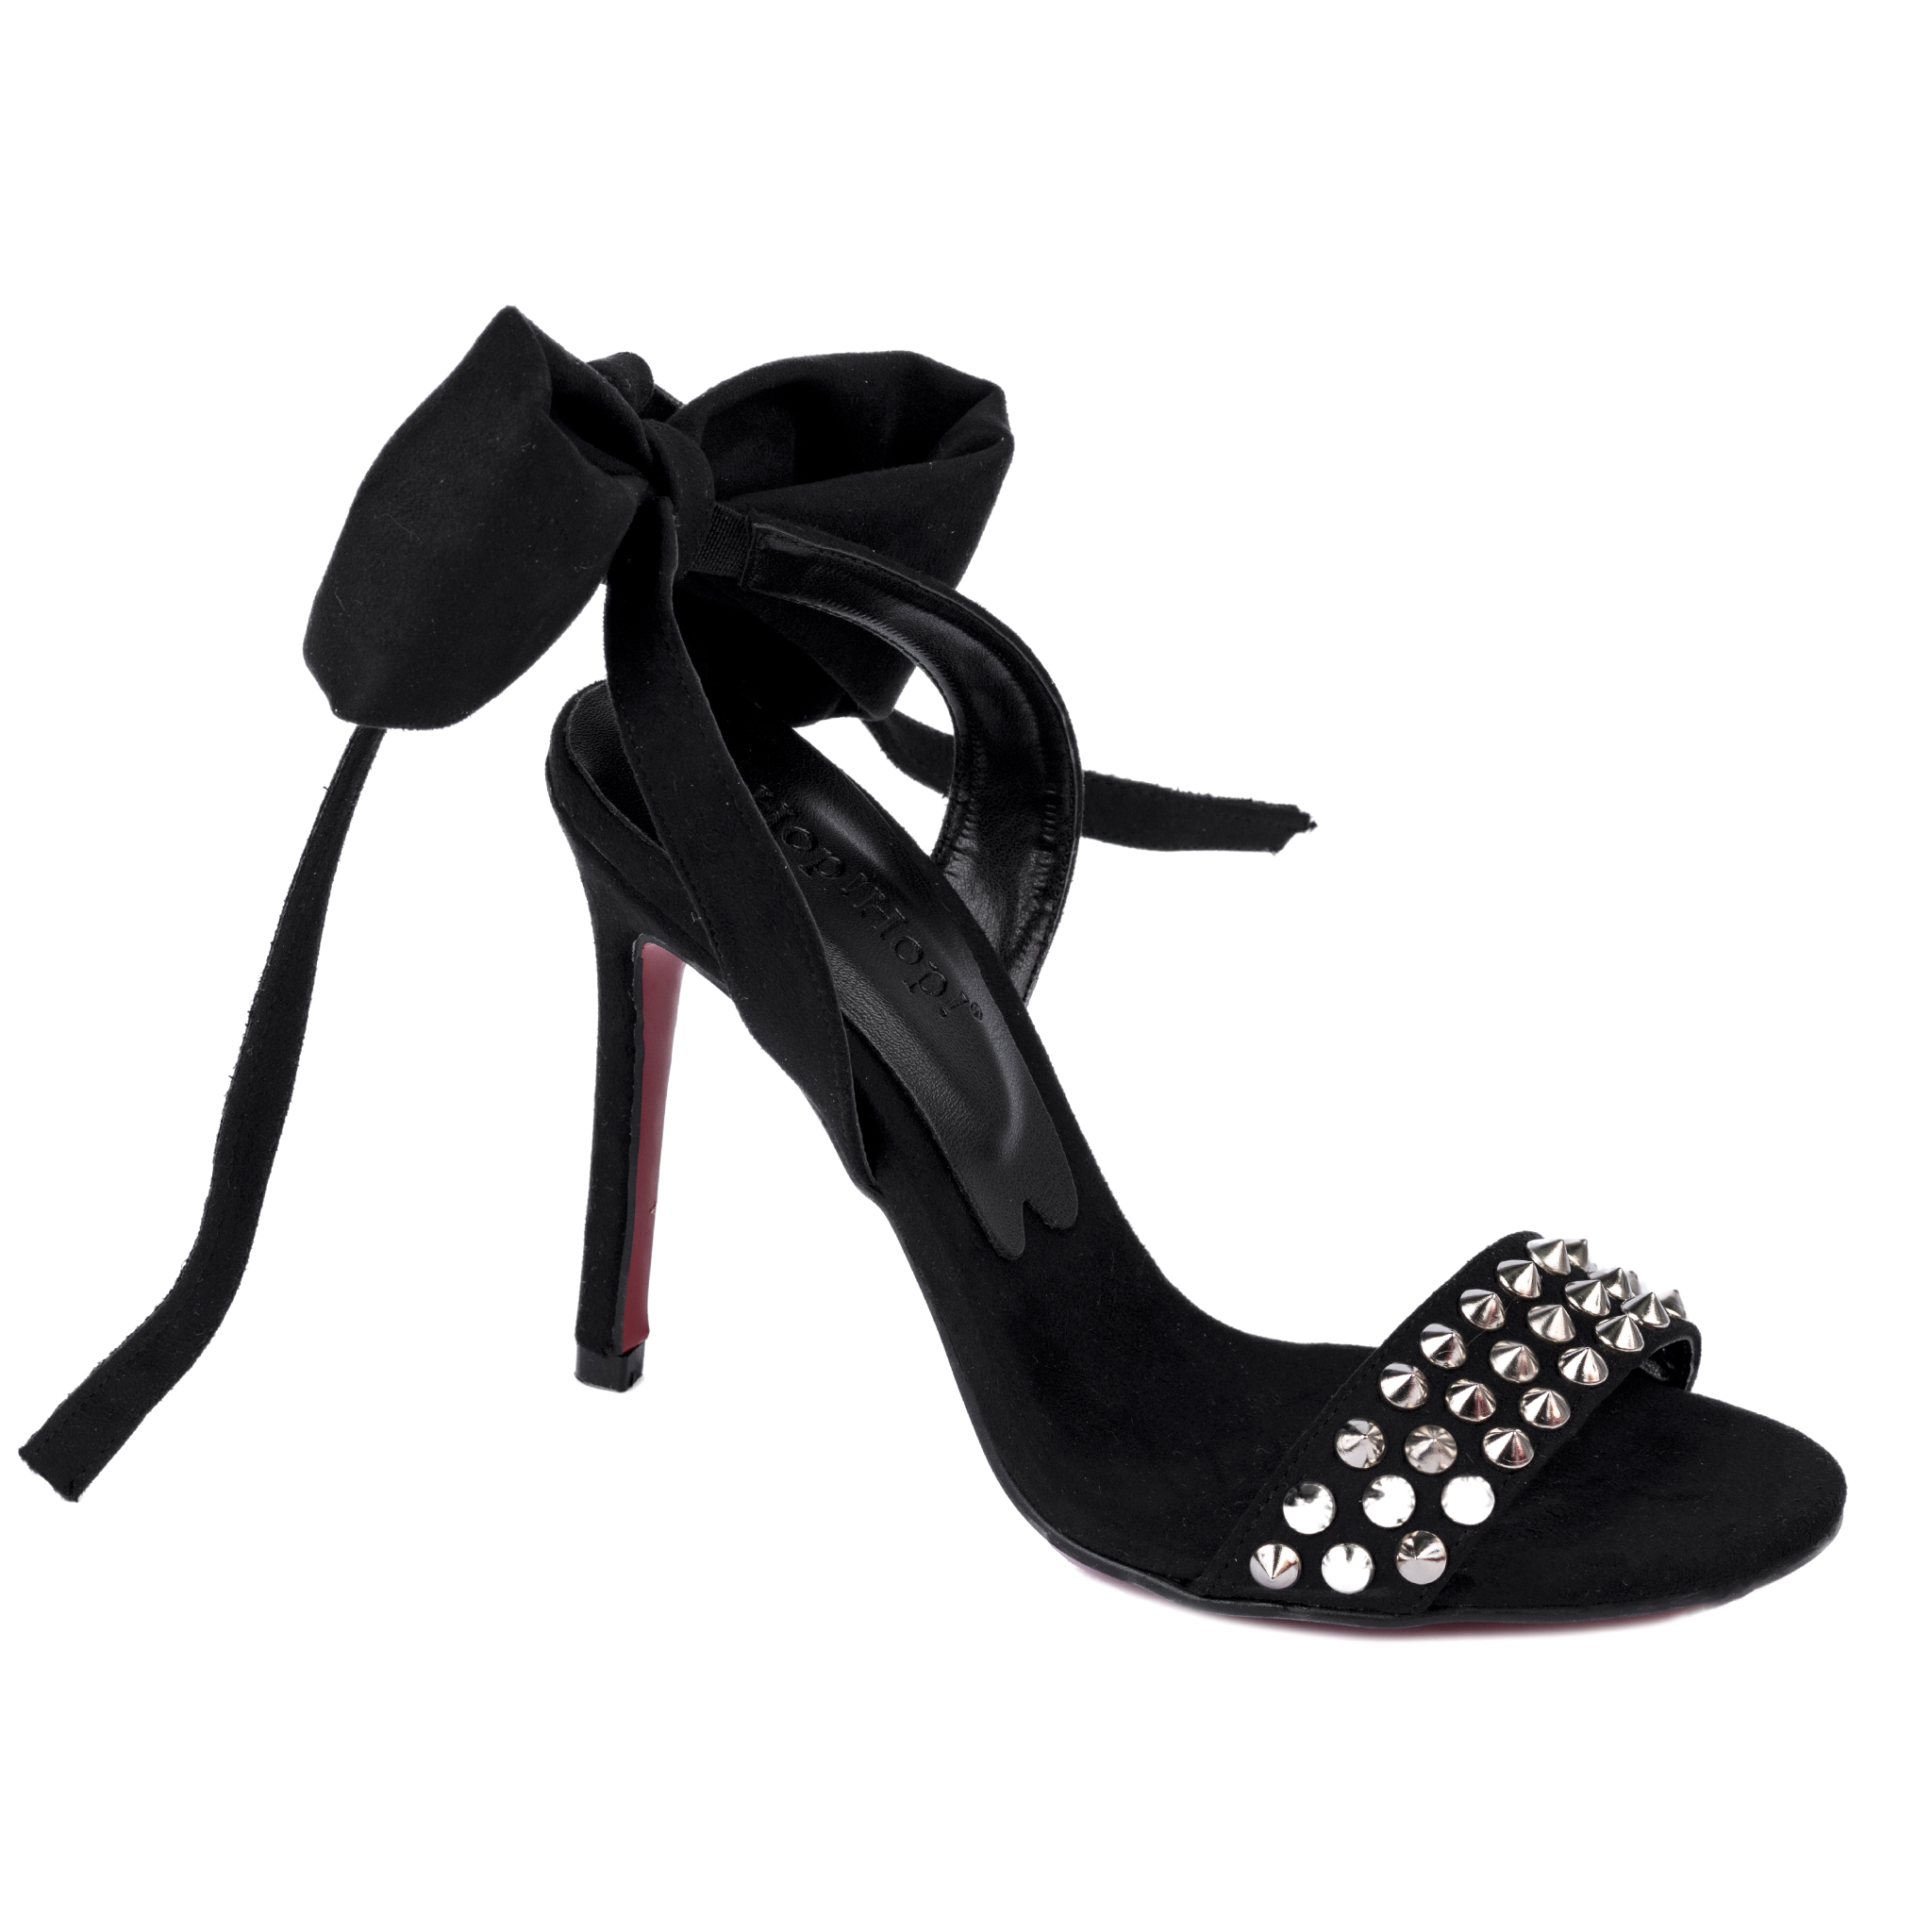 THIN HEEL VELOUR SANDALS WITH BOW AND RIVETS - BLACK